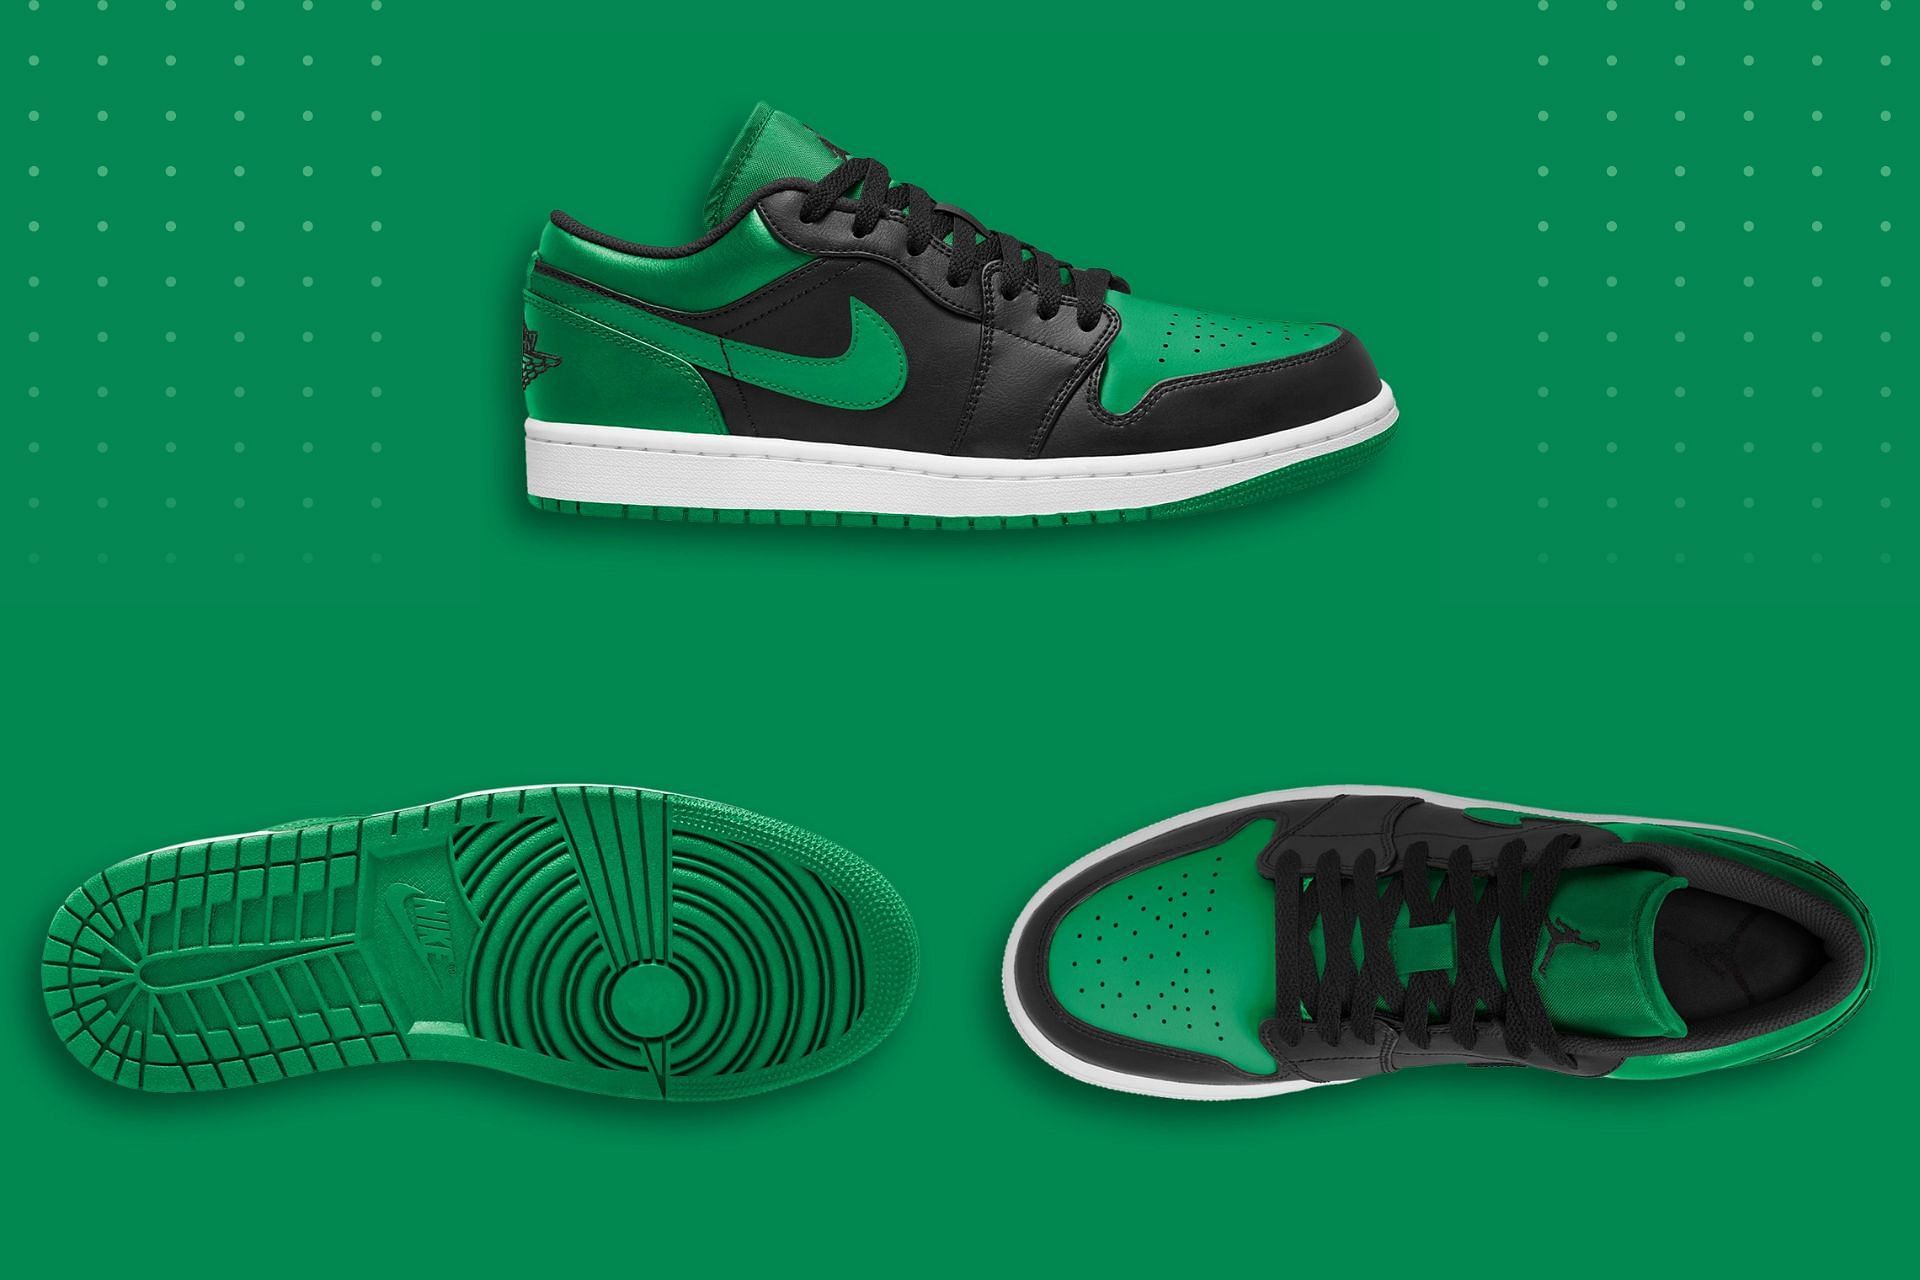 The upcoming Nike Air Jordan 1 Low &quot;Lucky Green&quot; sneakers, coming clad in a green, white, and black colorway (Image via Sportskeeda)